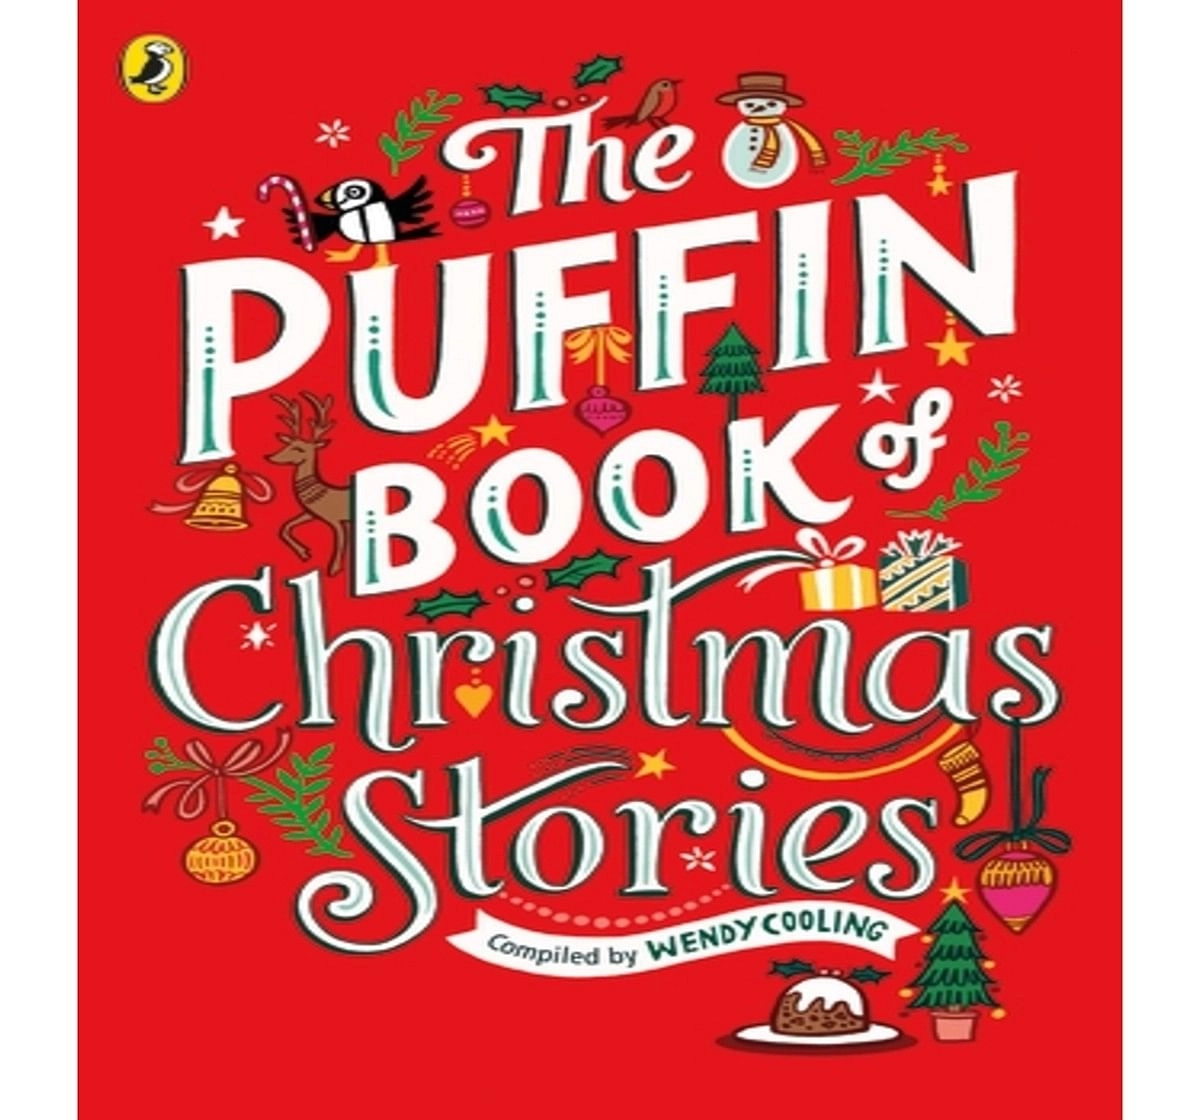 The Puffin Book of Christmas Stories A, 144 Pages Book by Wendy Cooling, Paperback